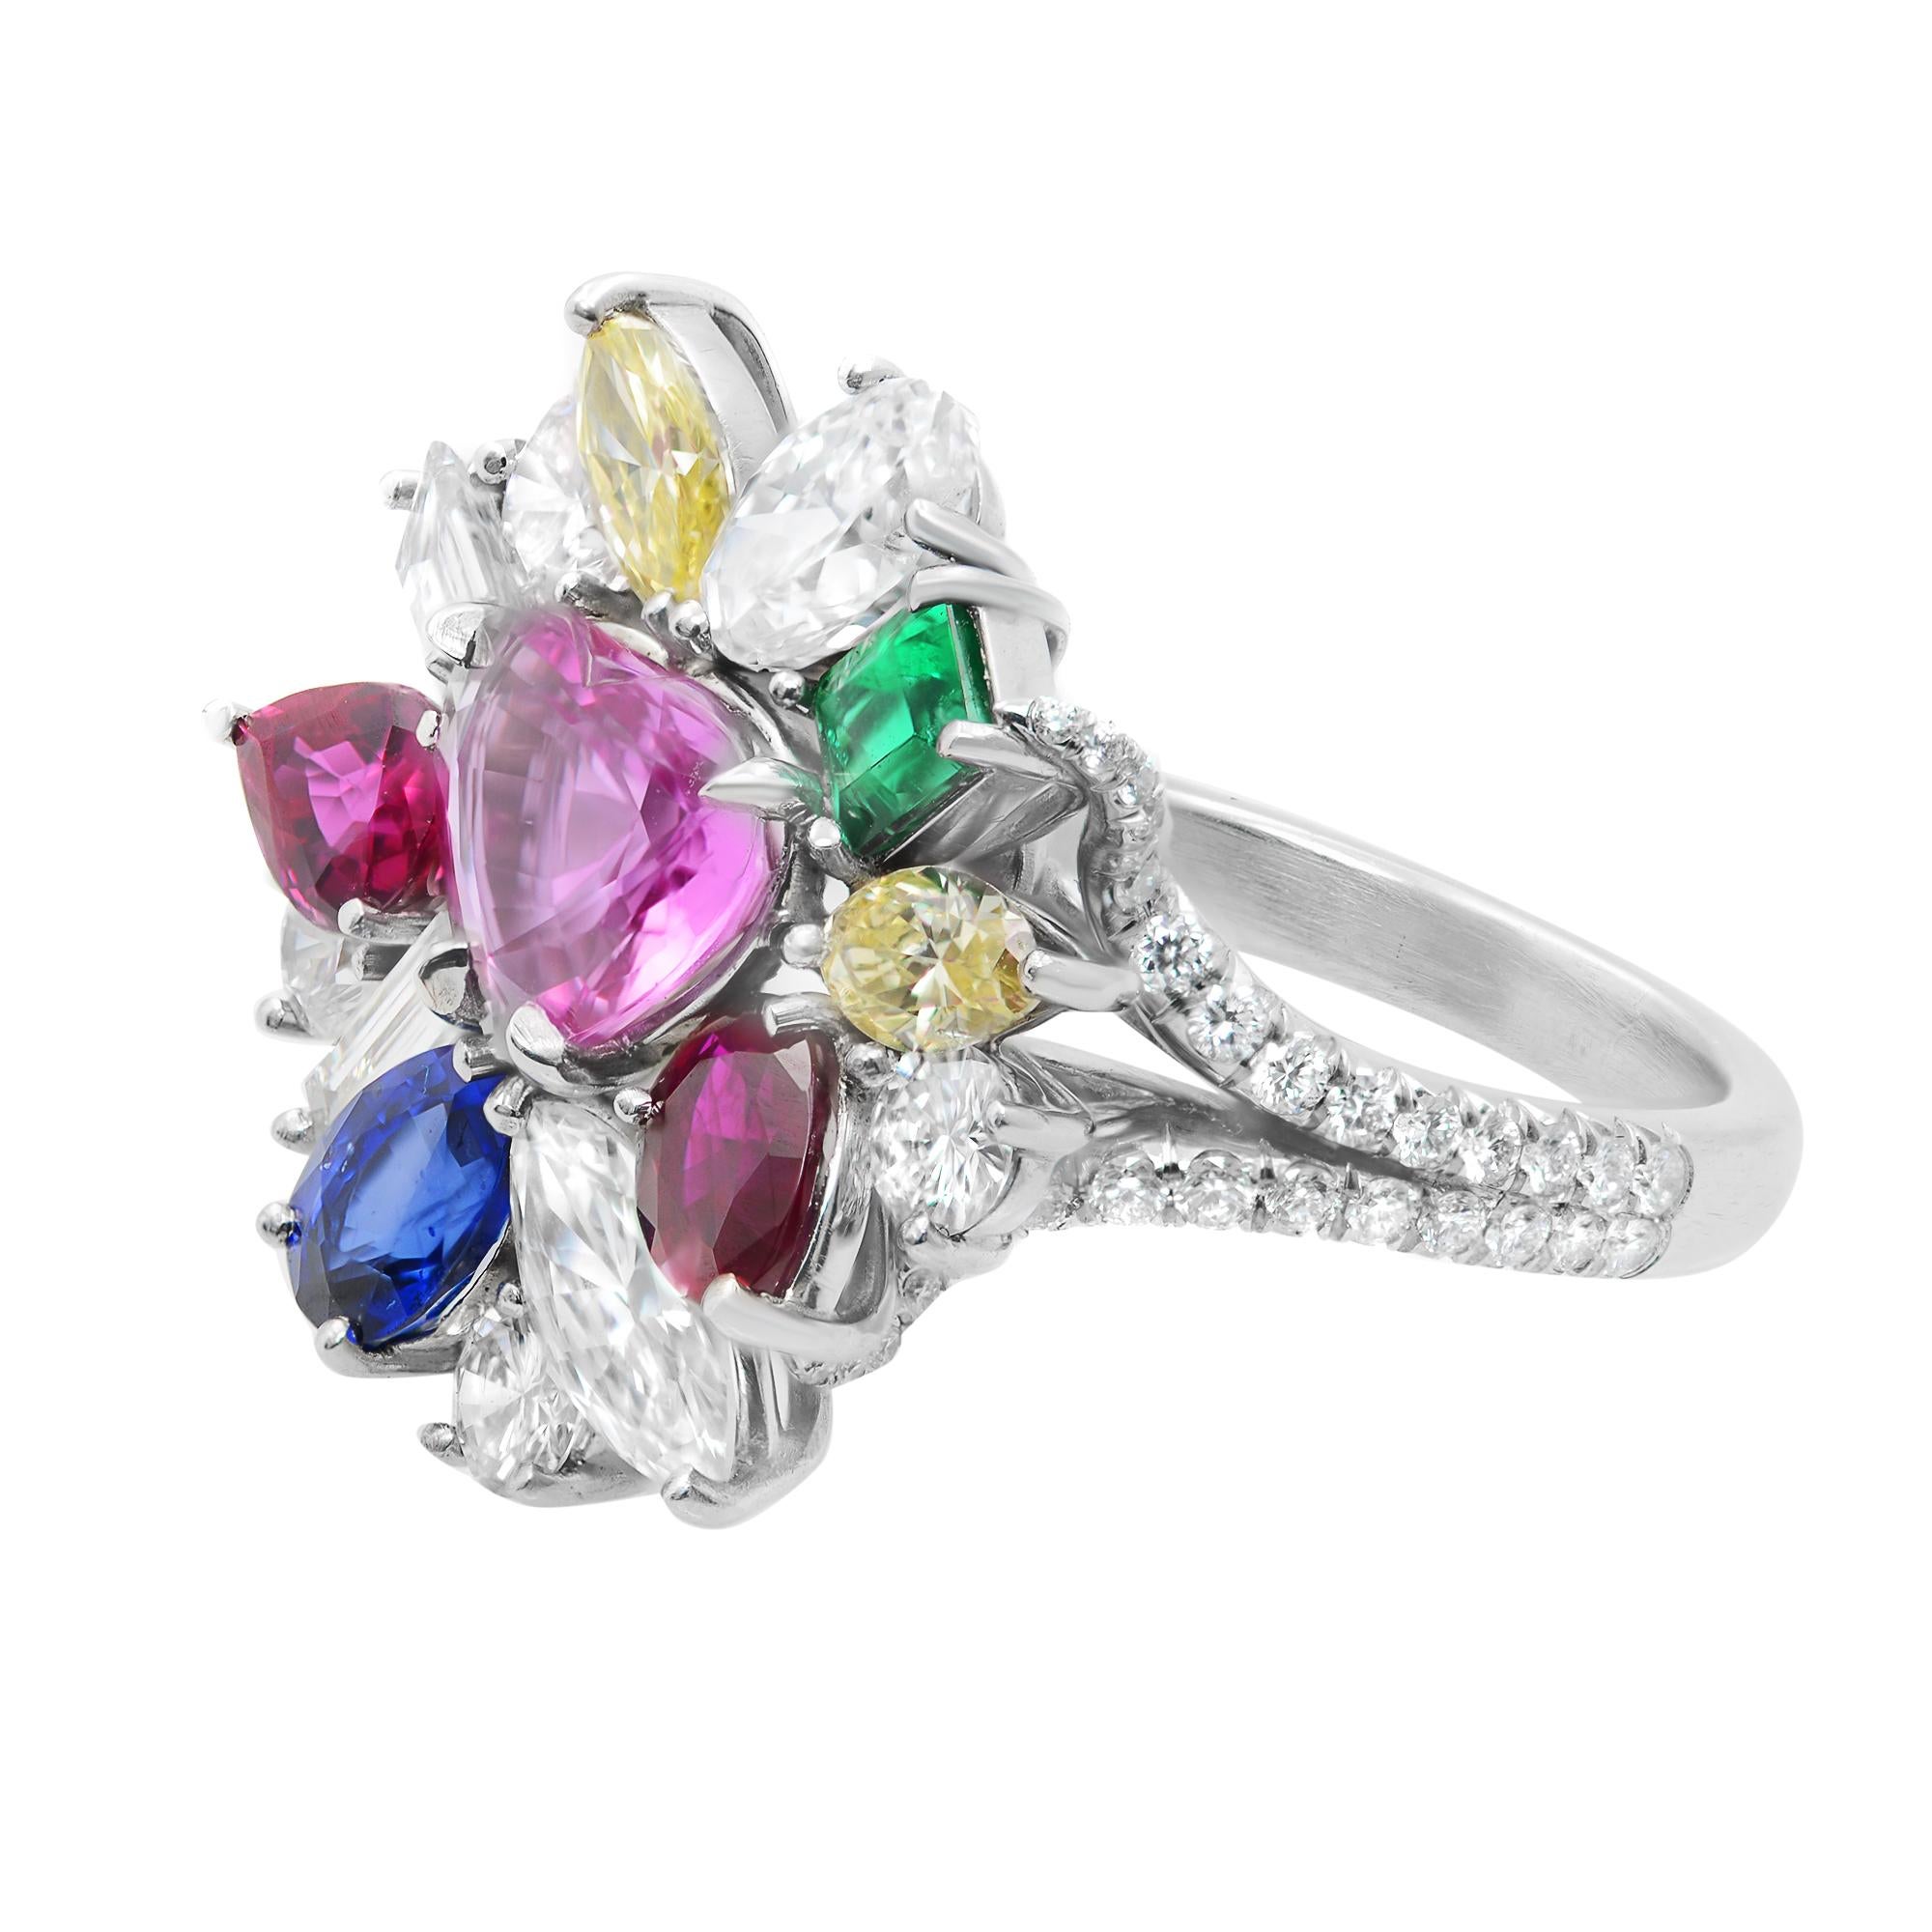 This multi colored gemstone cocktail ring features a cluster of different gemstones in a decorative spray pattern set in Platinum. Total number of stones used: 231. Featuring a stunning collection of gemstones like Emerald, Sapphire, Ruby, white